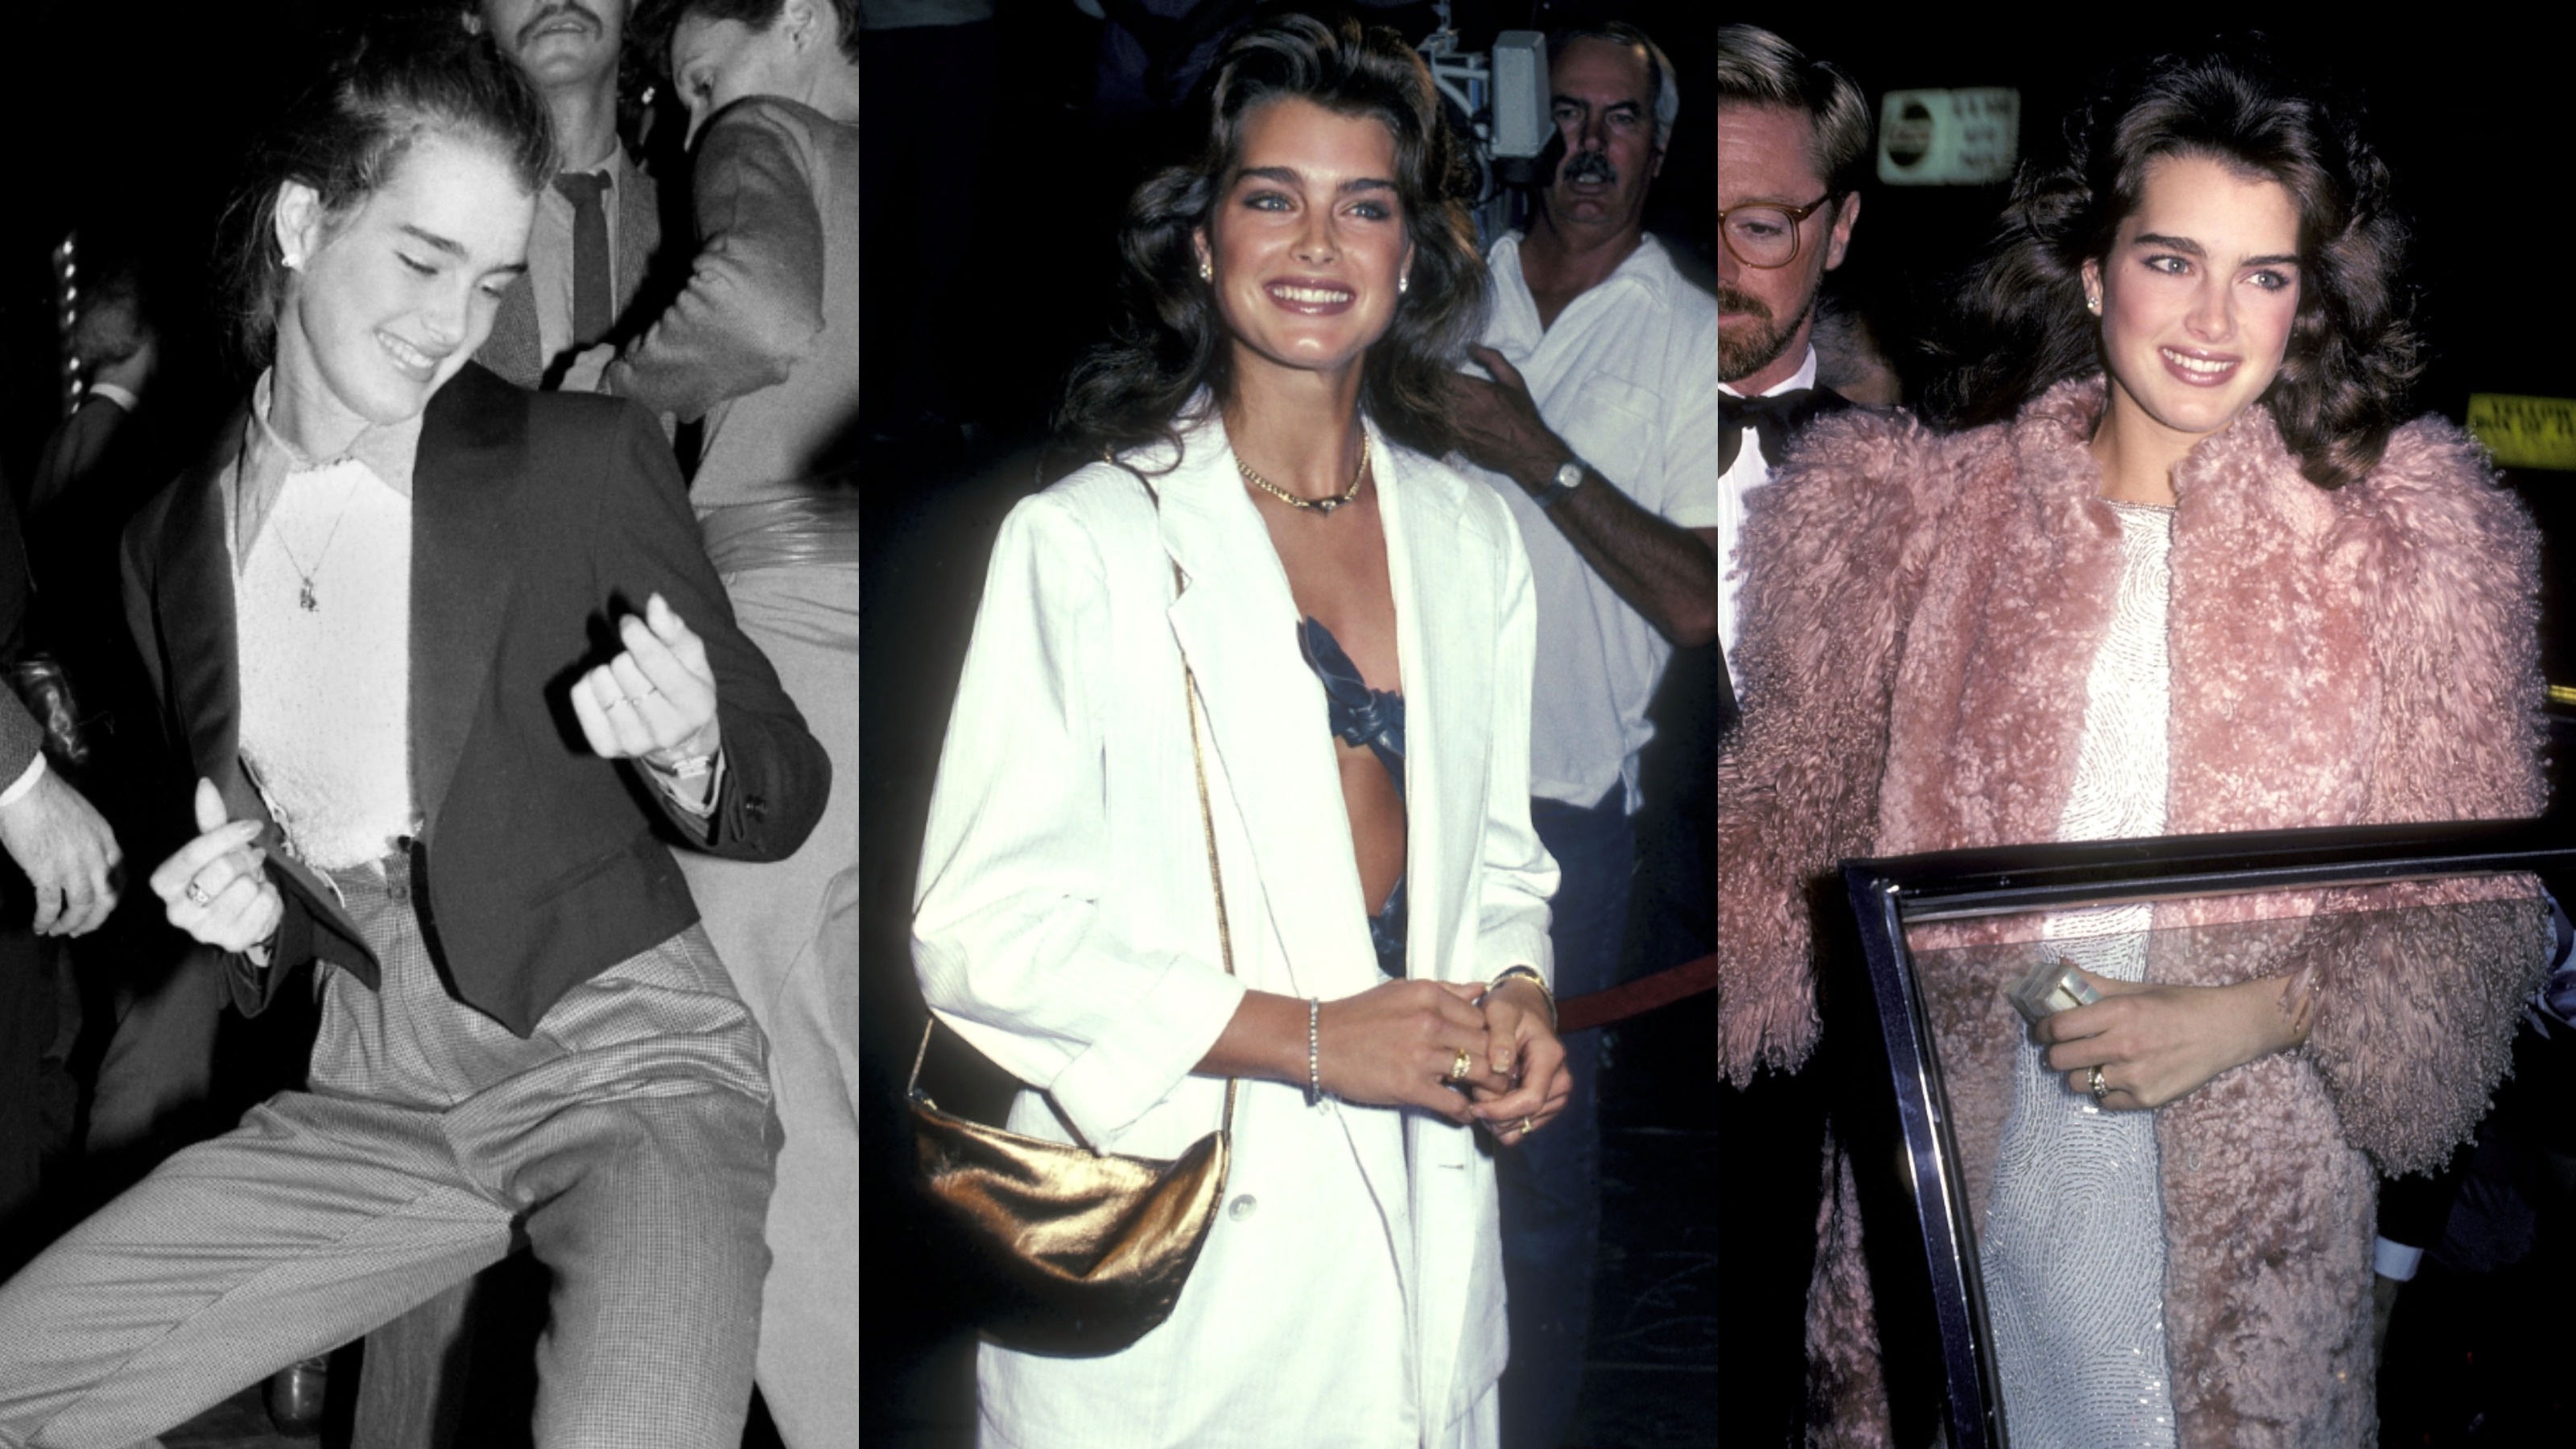 Brooke Shields movies, 80s fashion, iconic outfits, style, 3200x1800 HD Desktop